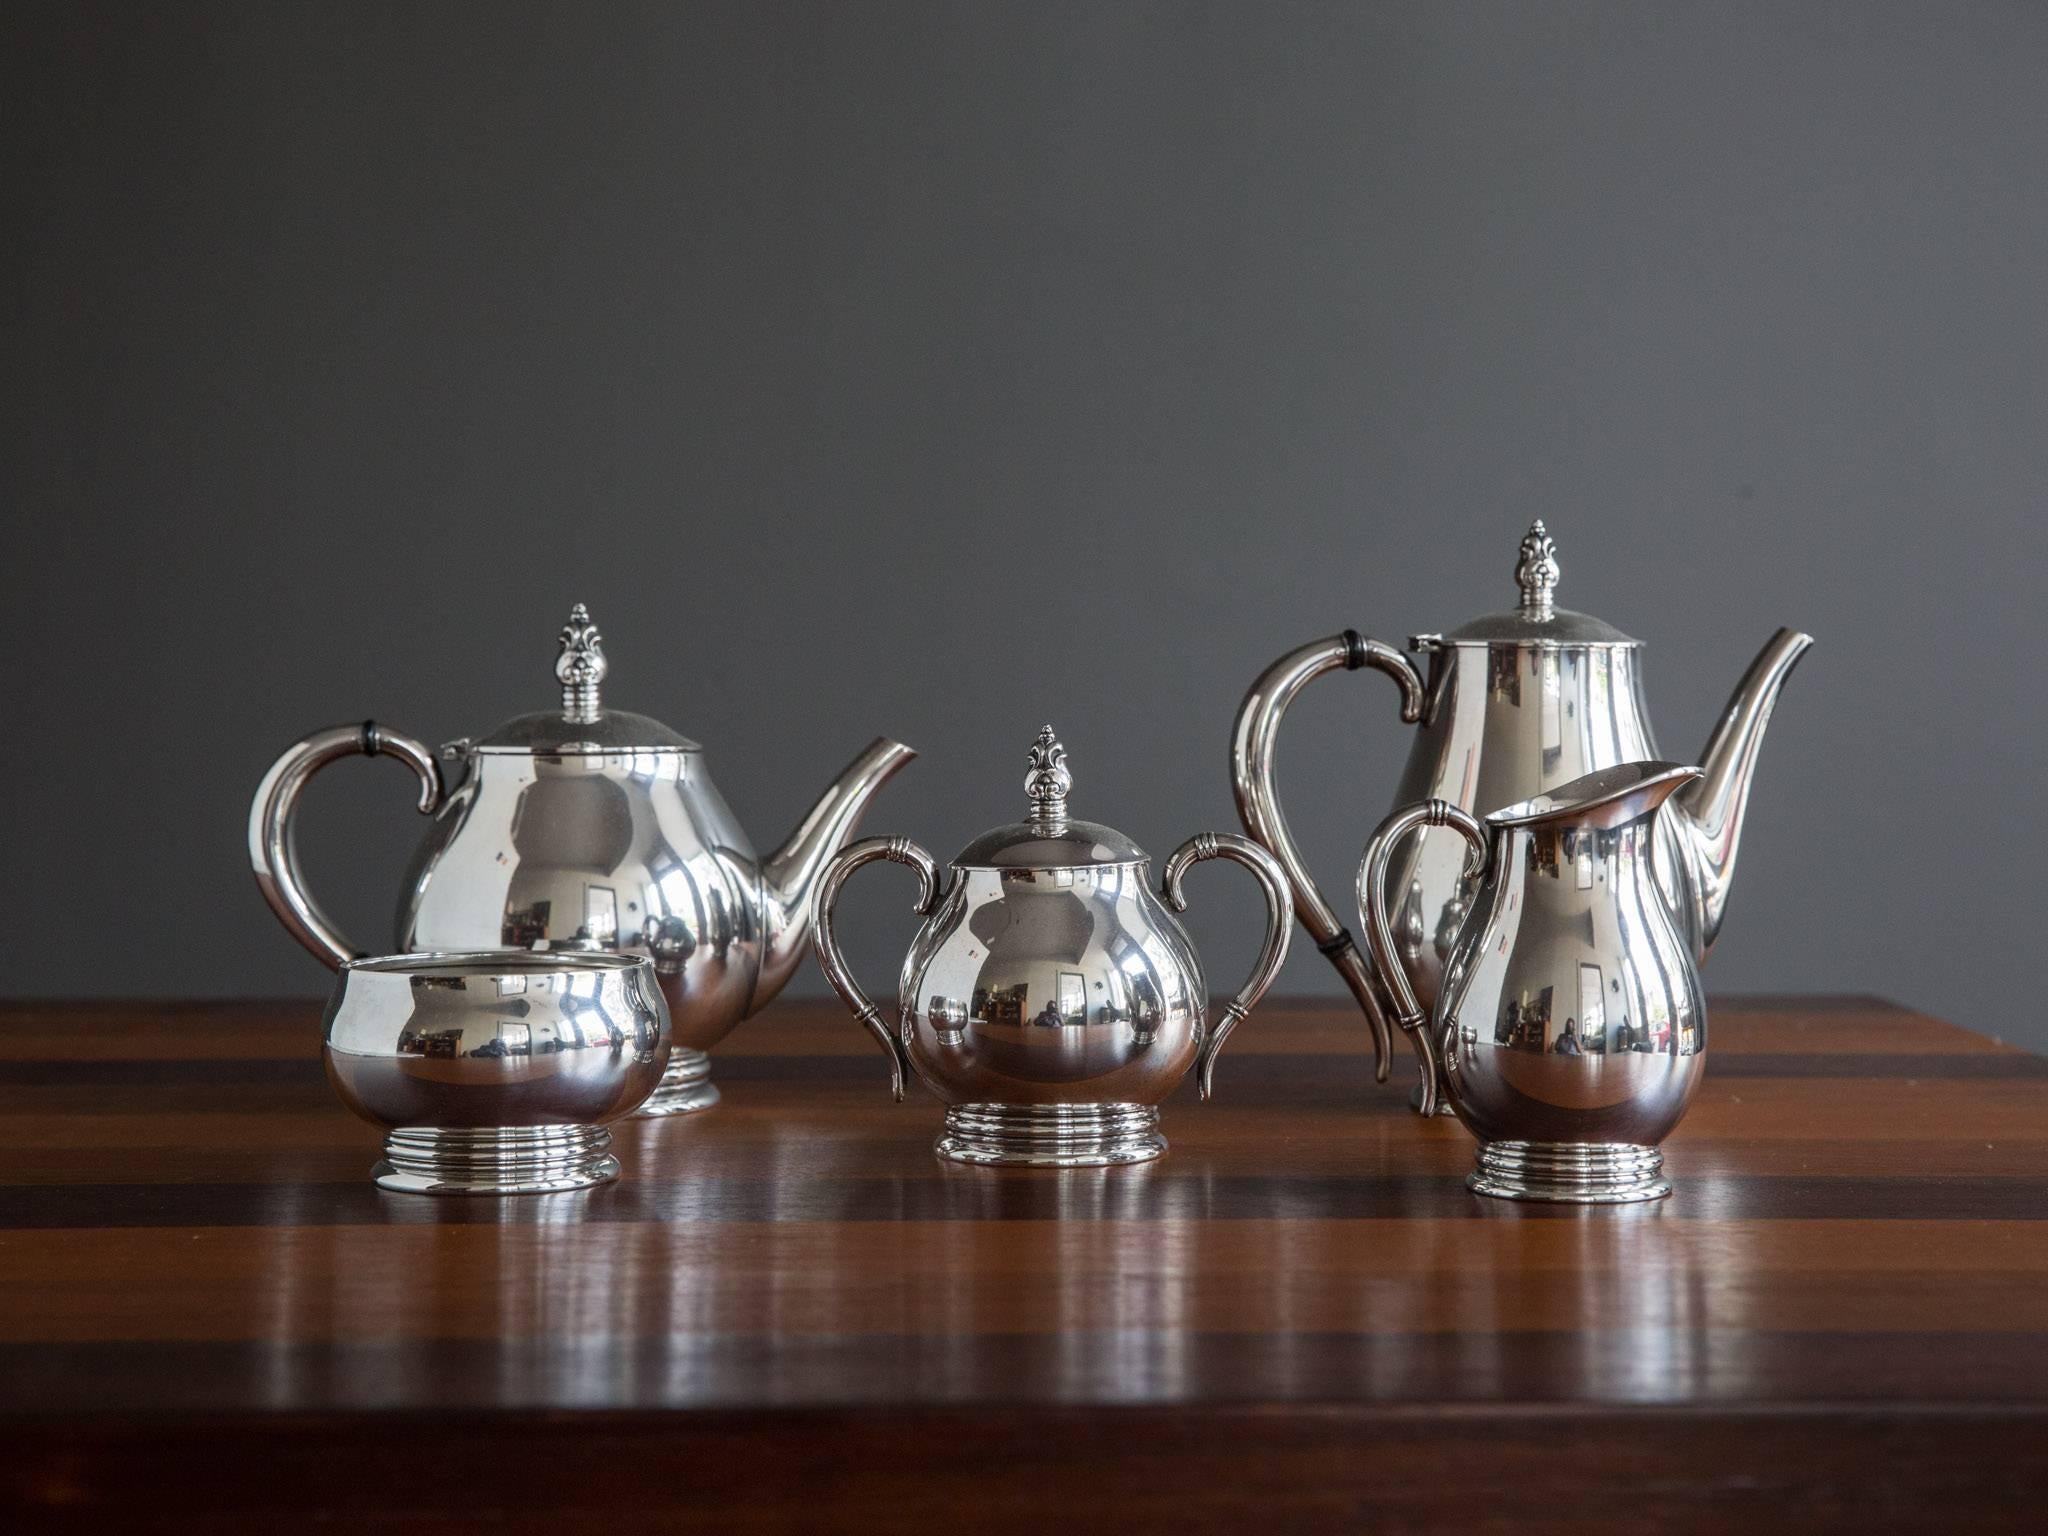 A five-piece sterling silver coffee and tea service in the "Royal Danish" pattern by International Silver, circa 1940s or 1950s. Featuring a coffee pot, tea pot, cream/milk jug, covered sugar bowl, and waste bowl. The coffee pot, tea pot